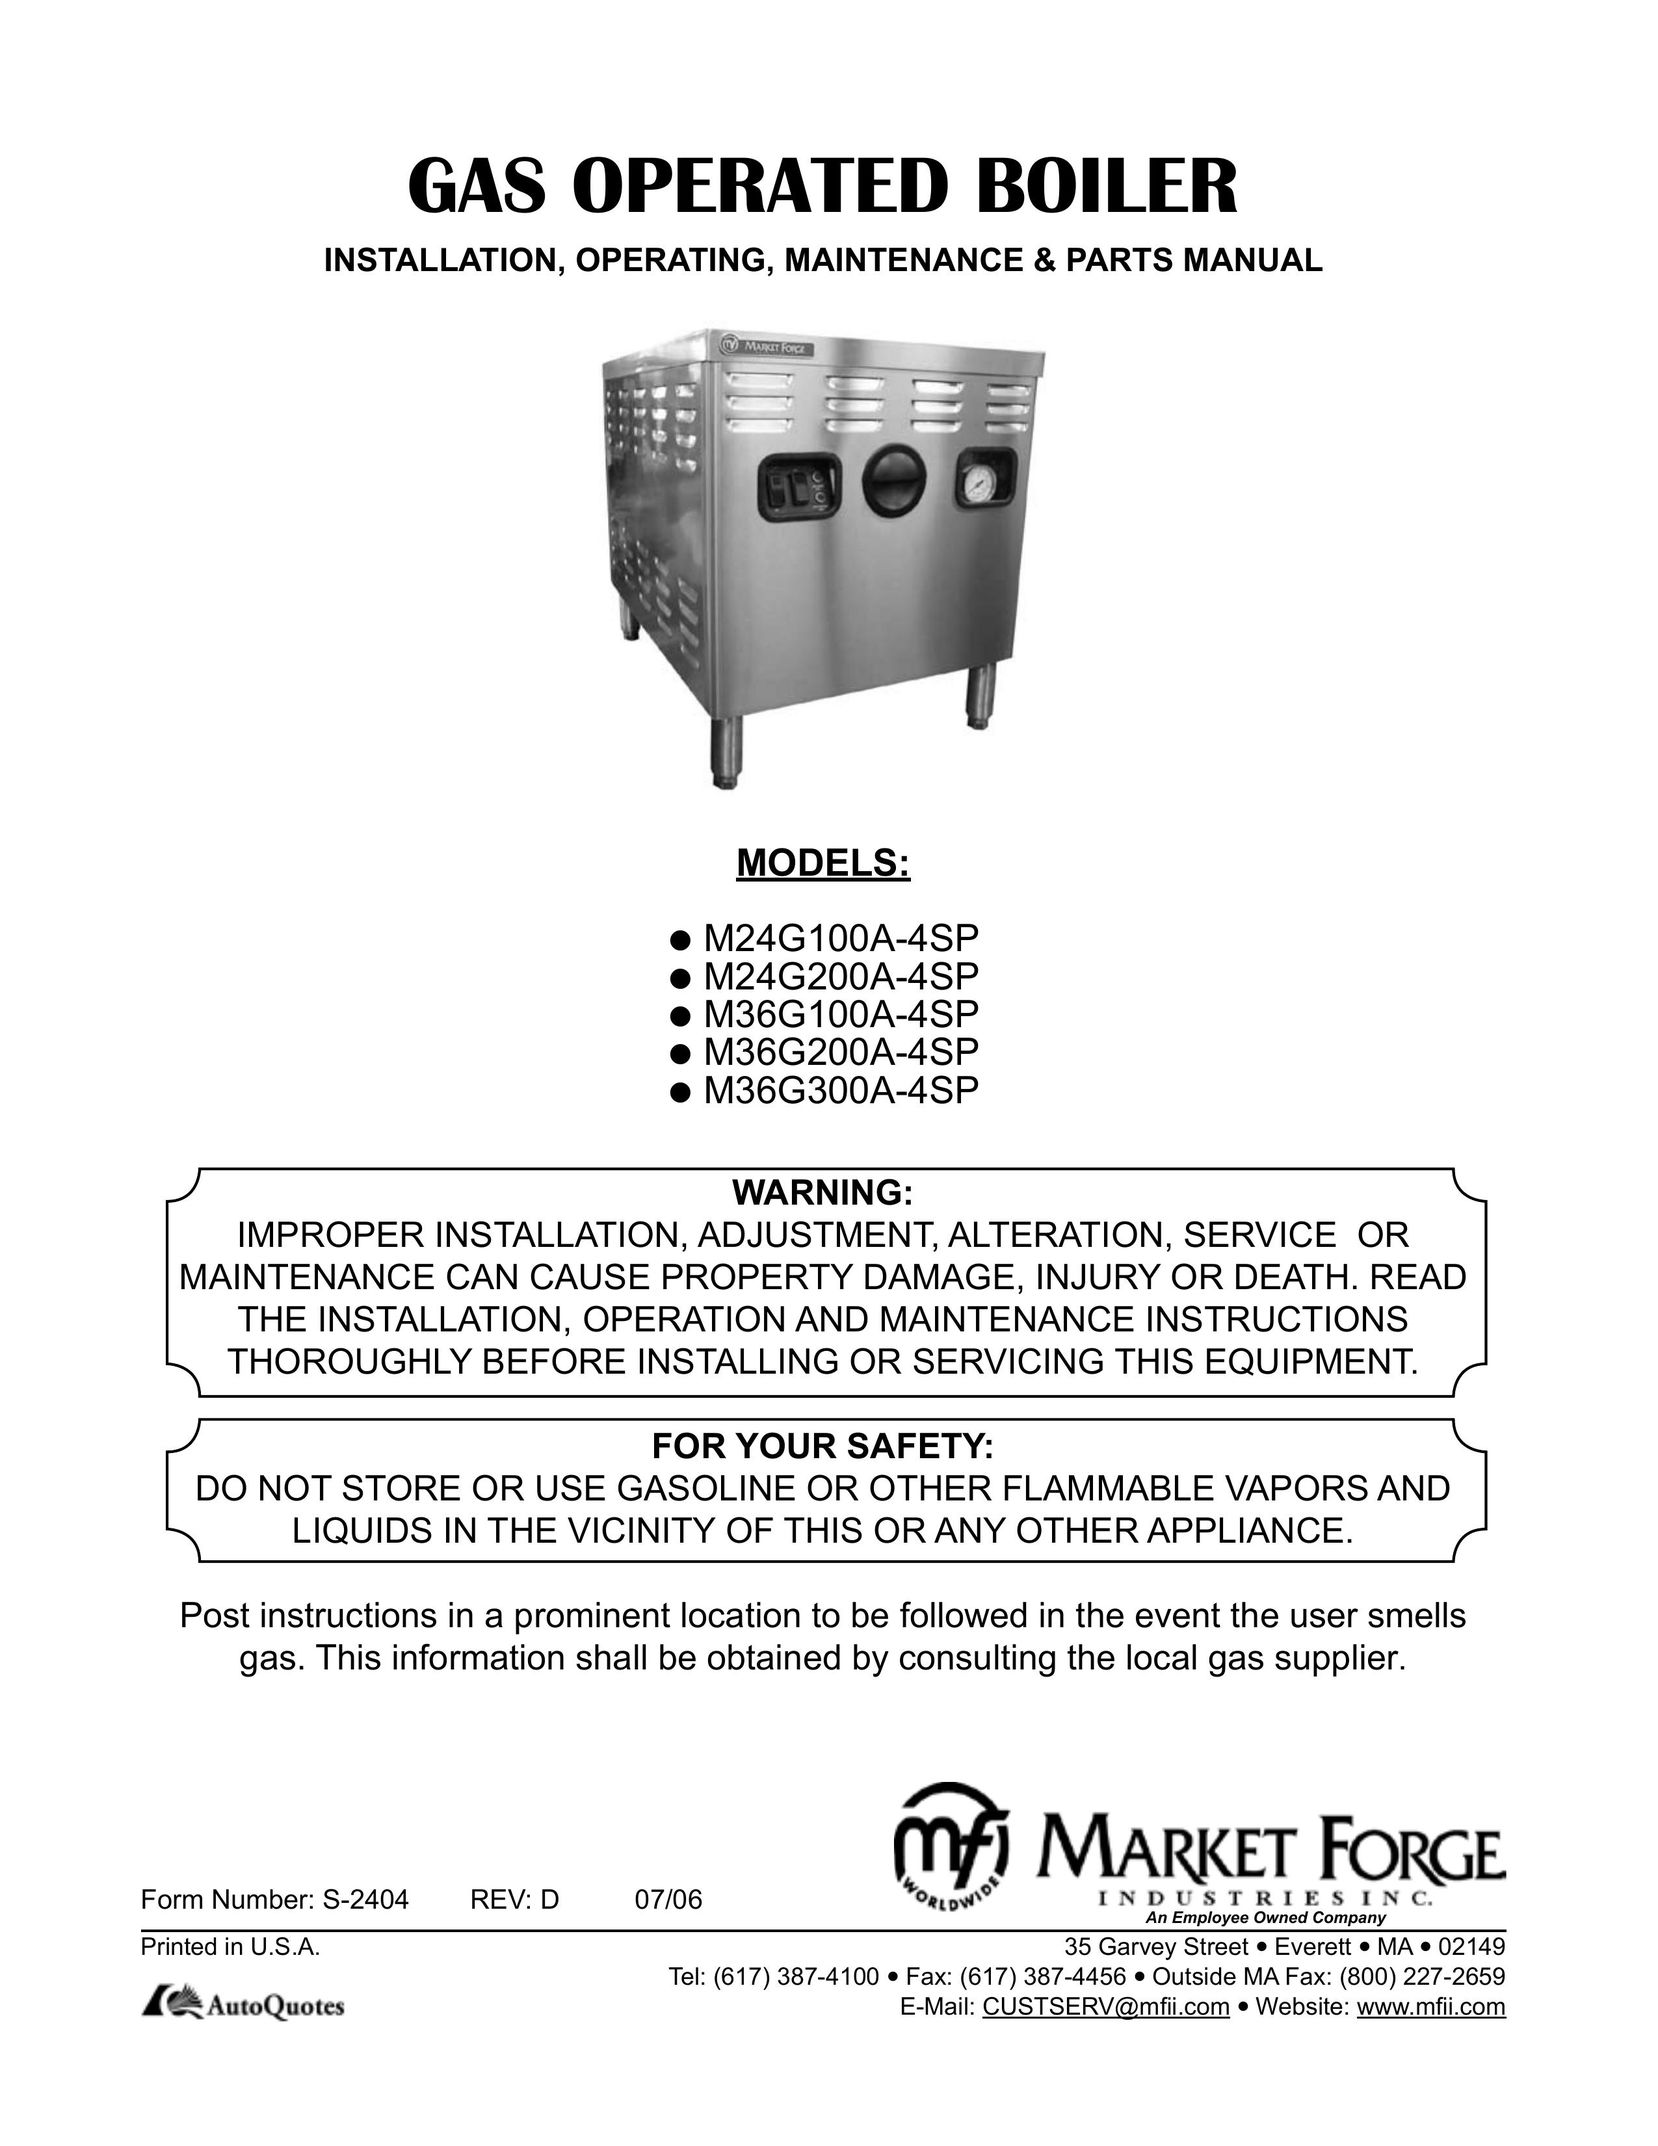 Market Forge Industries M36G100A-4SP Boiler User Manual